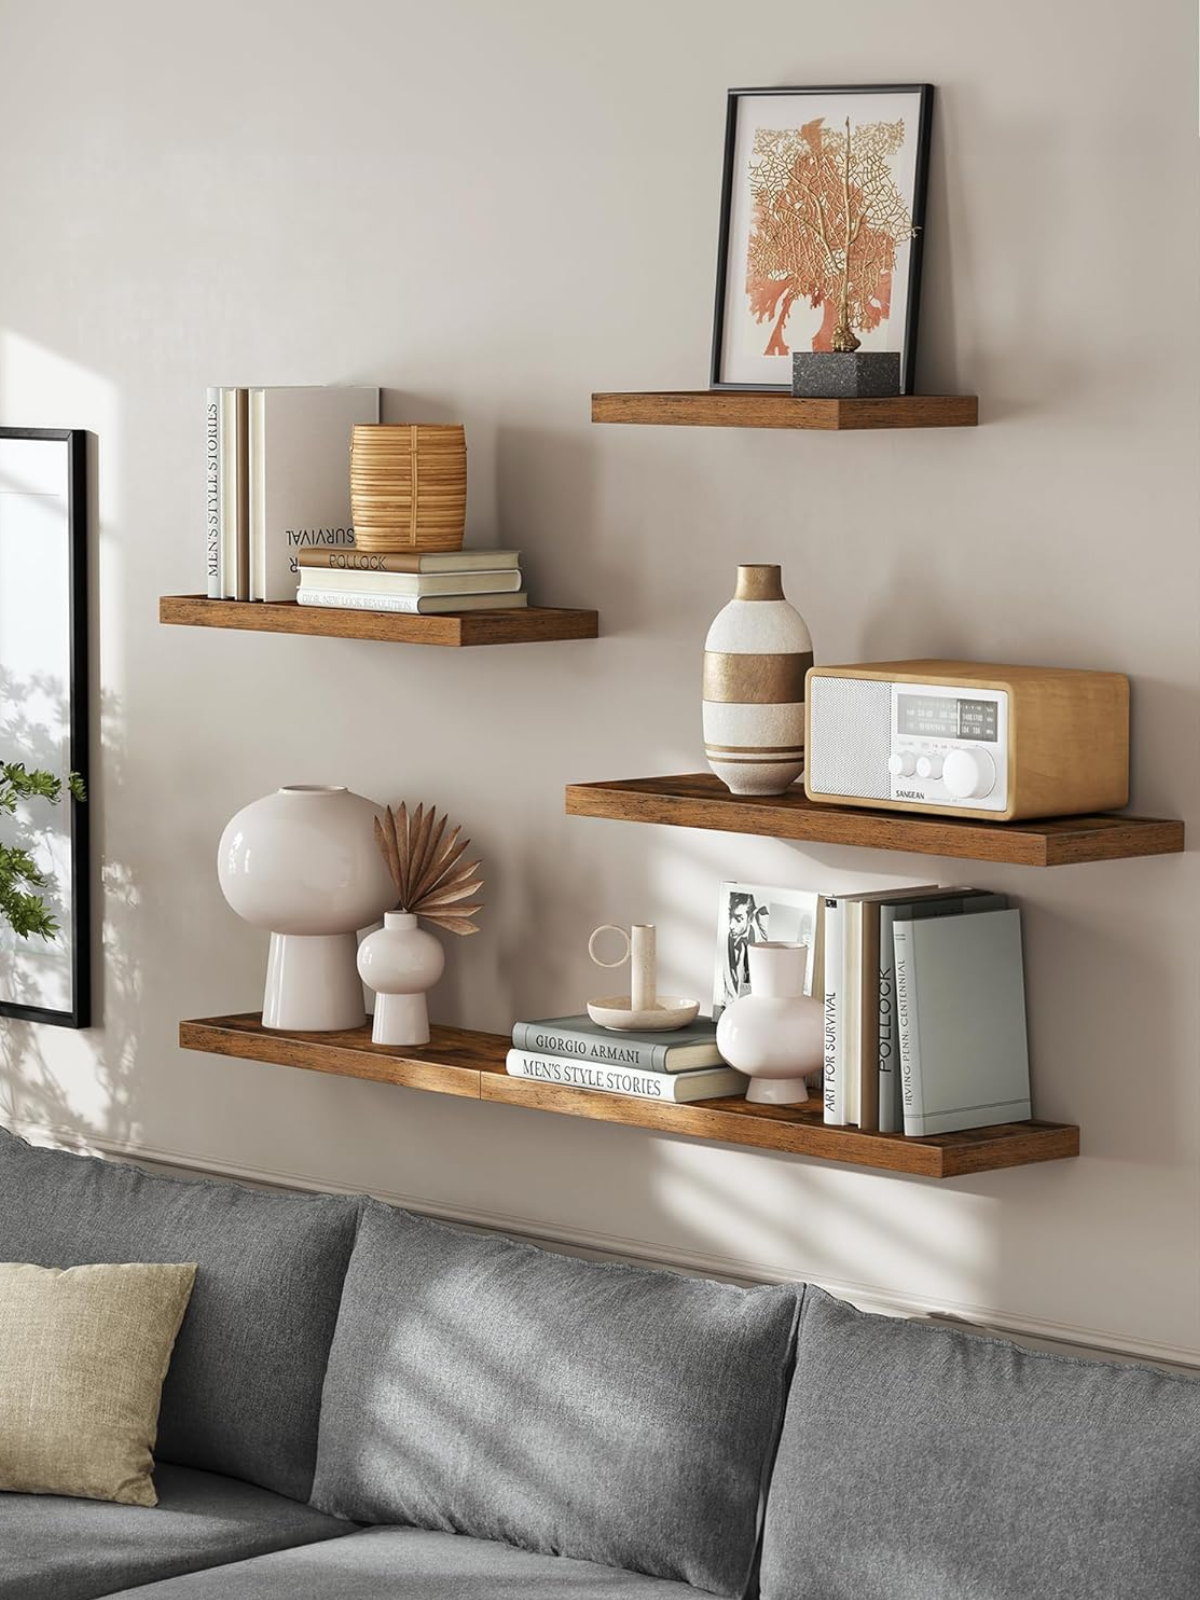 Wall Shelves Set of 3, Floating Shelves, Wall Mounted, 8 x 23.6 x 1.5 Inches, Display Shelves for Picture Frames, Wall Decor, Hanging Shelf for Living Room, Kitchen, Rustic Brown